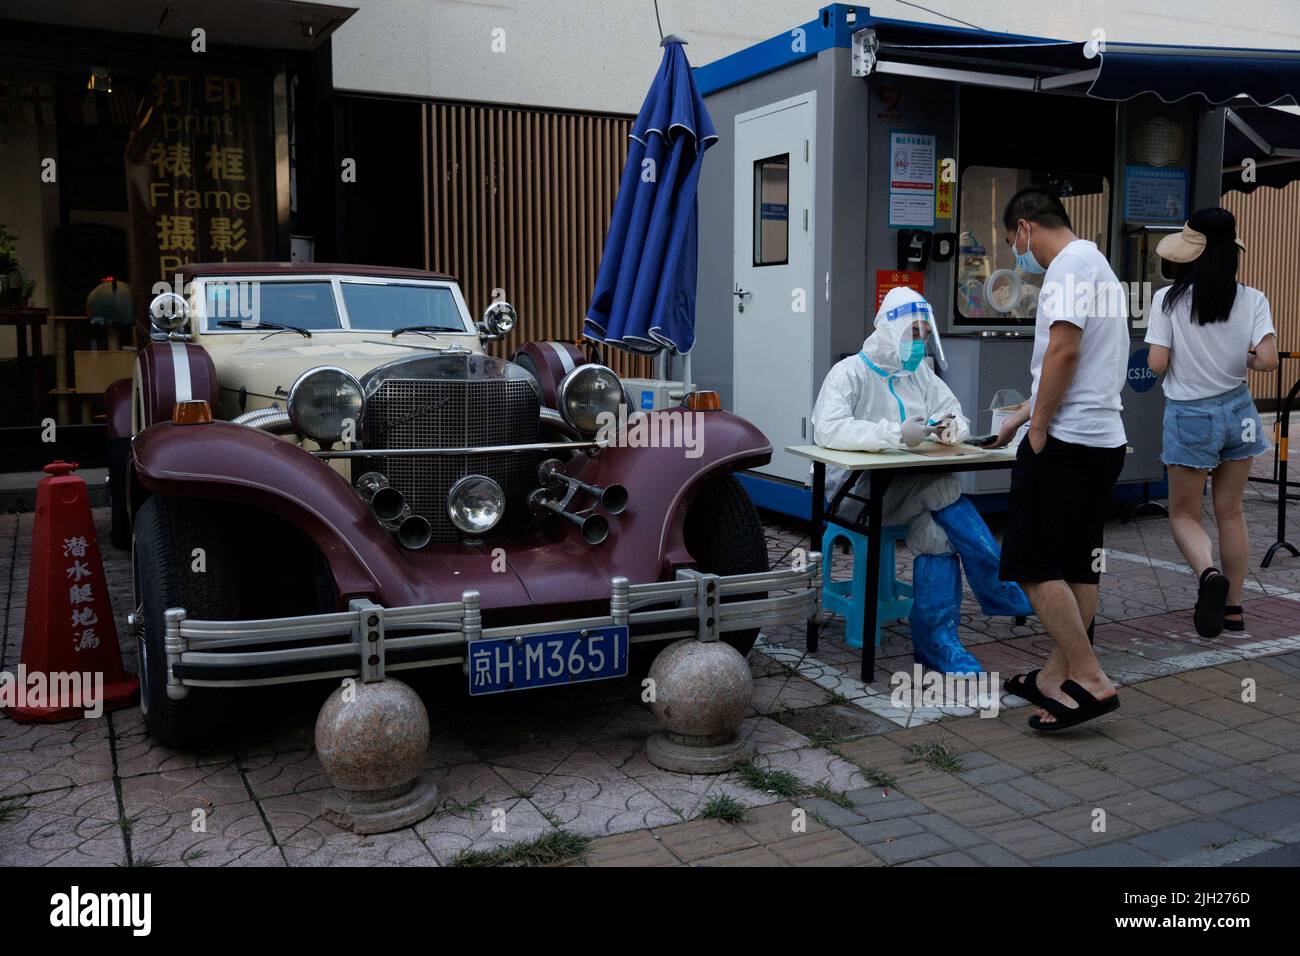 A pandemic prevention worker sits next to a vintage car as he scans a man's ID card at a nucleic acid testing station, amid a coronavirus disease (COVID-19) outbreak, in Beijing, China, July 14, 2022. REUTERS/Thomas Peter Stock Photo